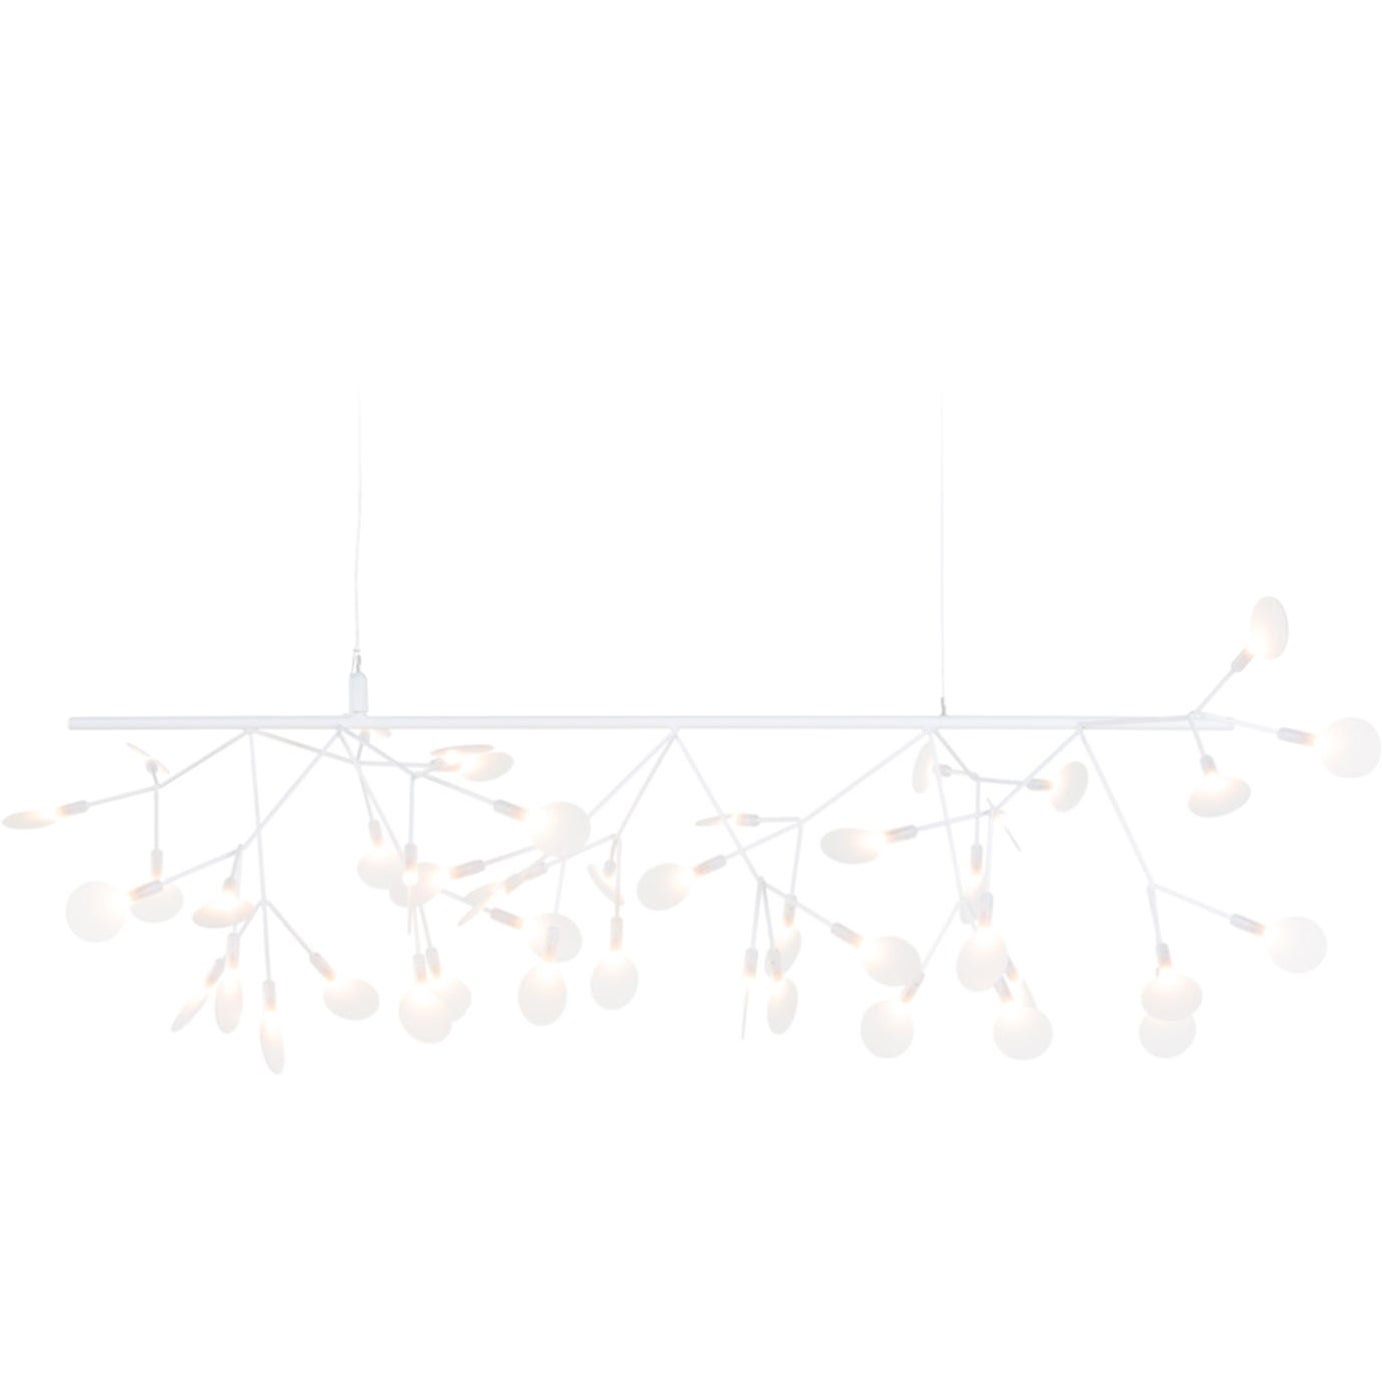 Moooi Heracleum Endless Suspension Lamp in White with Polycarbonate Lenses